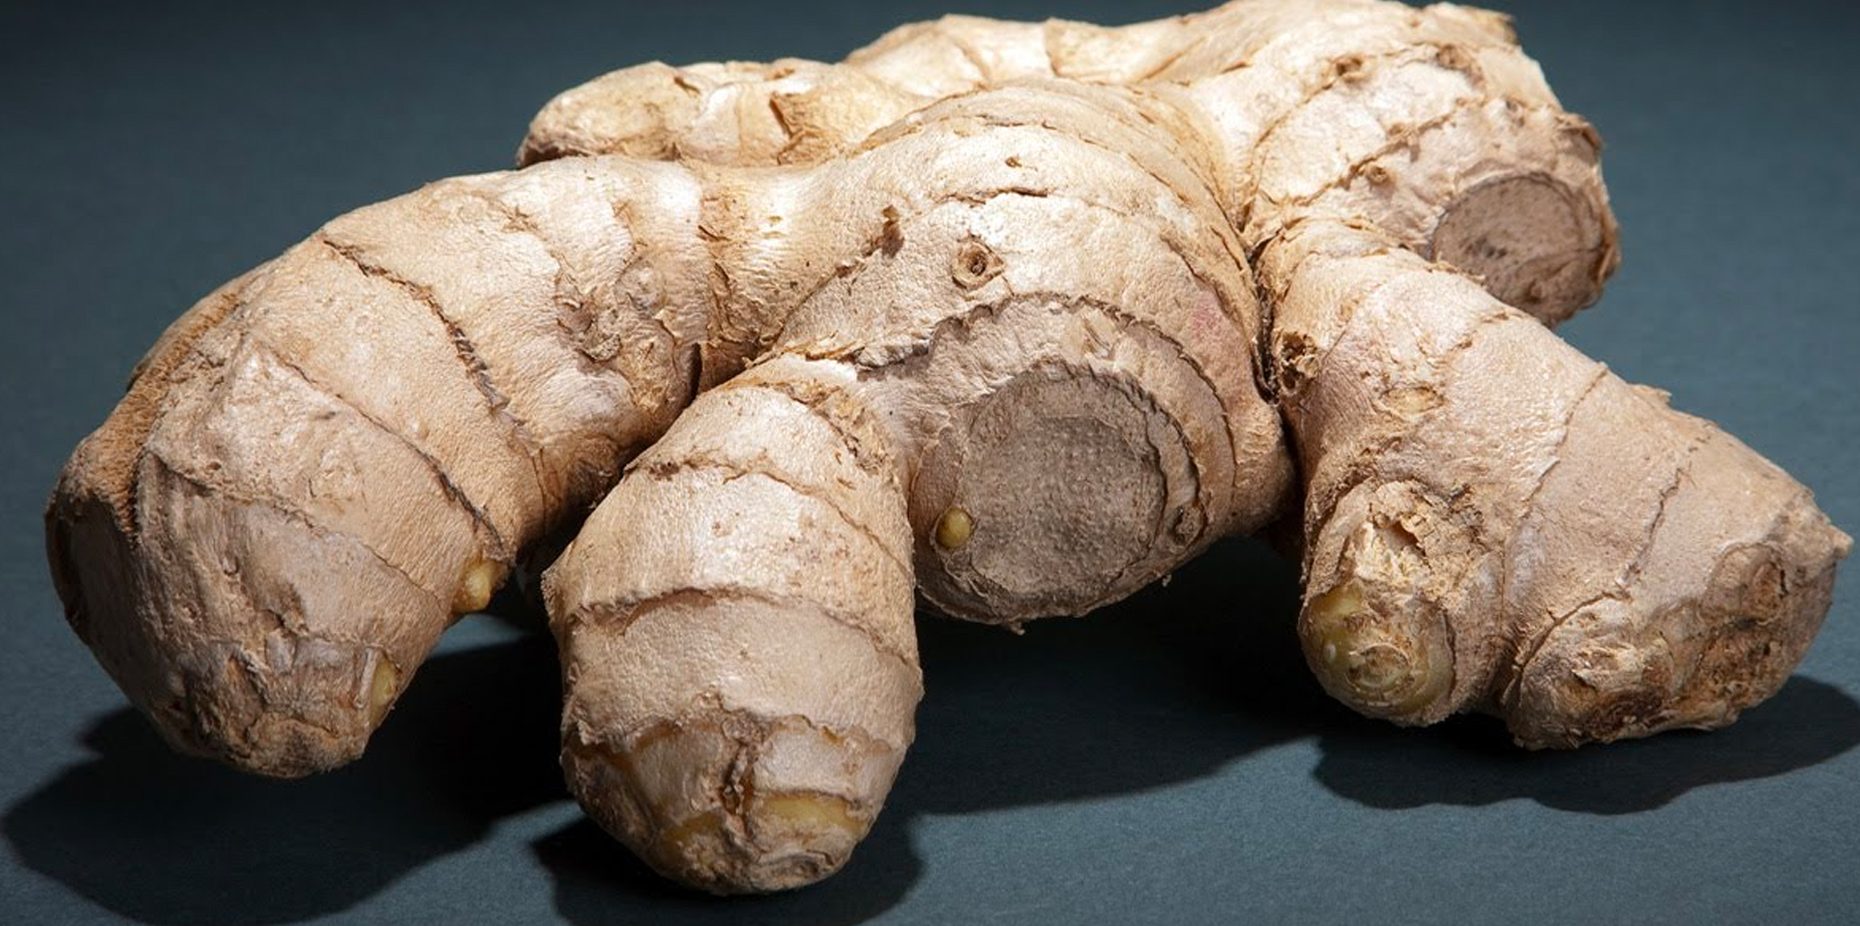 9 Potential Side Effects & Health Risks Of Eating Ginger